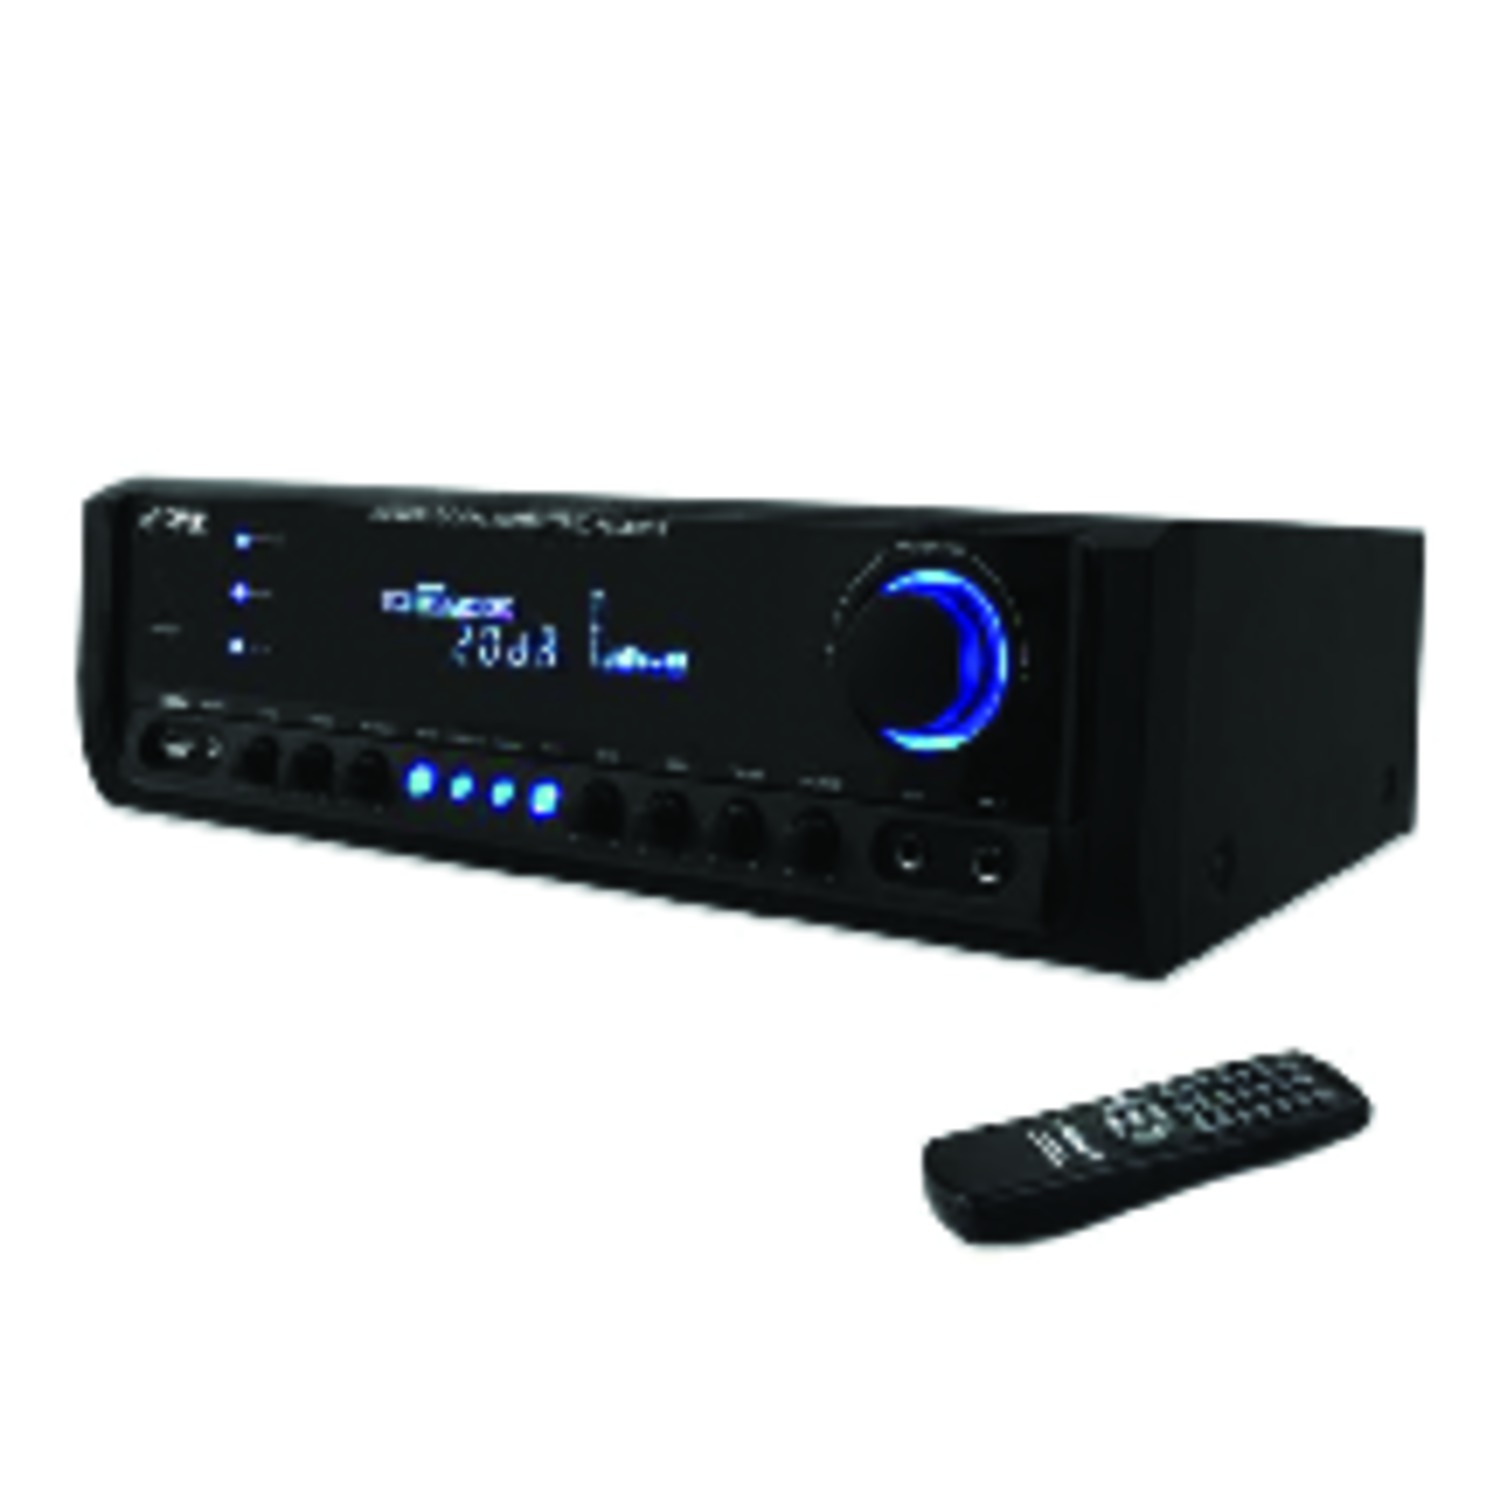 New Pyle PT390AU 300W 4 Channel Home Theater Amplifier Receiver Stereo USB/SD - image 3 of 6